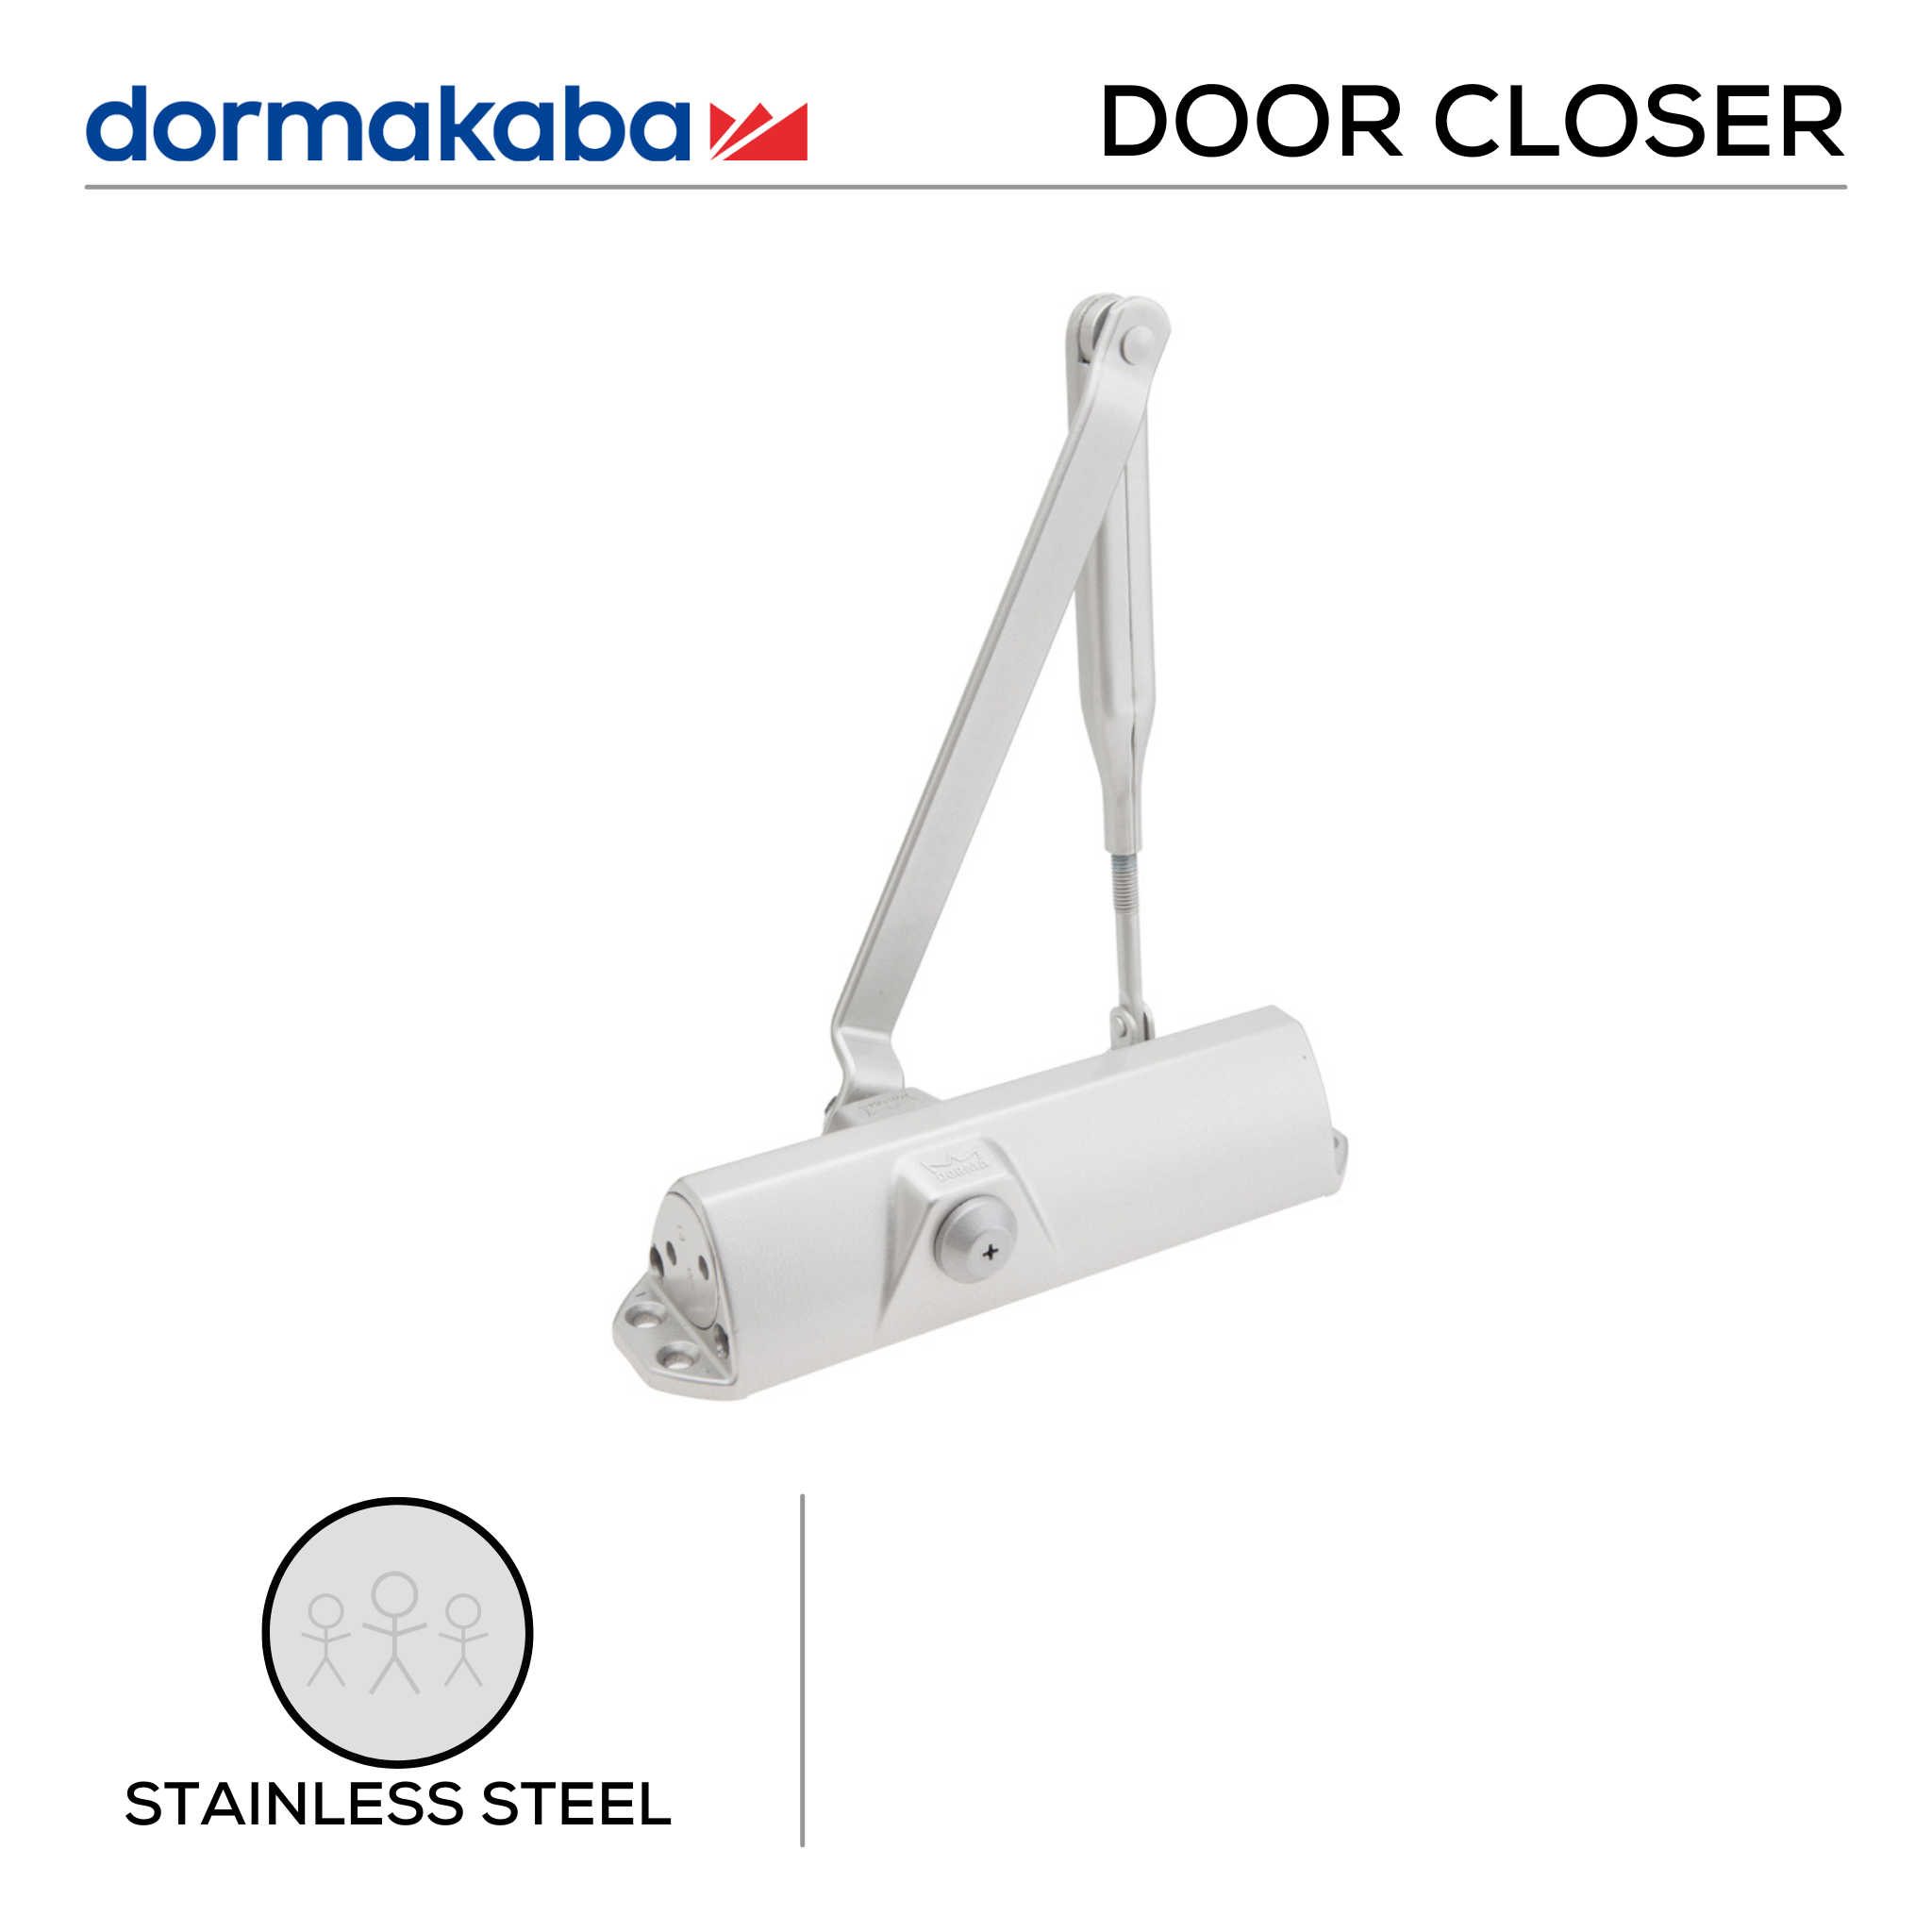 TS68 , Door Closer, Rack & Pinion, Non Hold Open, 1100mm (w), Projecting Arm, Transom Fixing, Door Leaf Fixing, EN 3/4, Hydraulic Speed Control, Stainless Steel, DORMAKABA